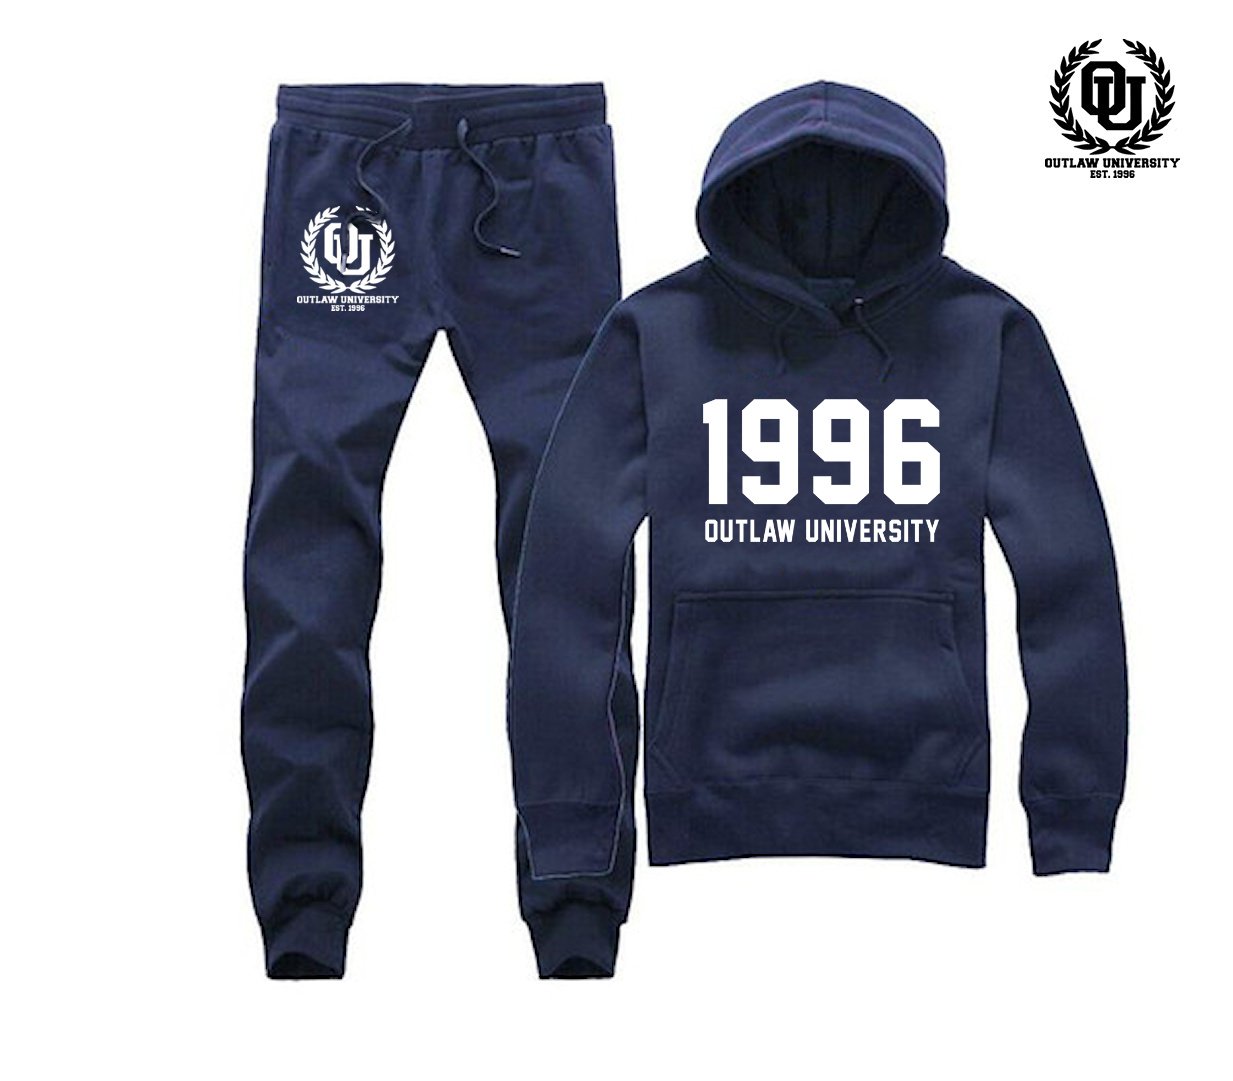 1996 Unisex Sweatsuit - Comes in Black, Grey, Navy Blue, / Outlaw ...